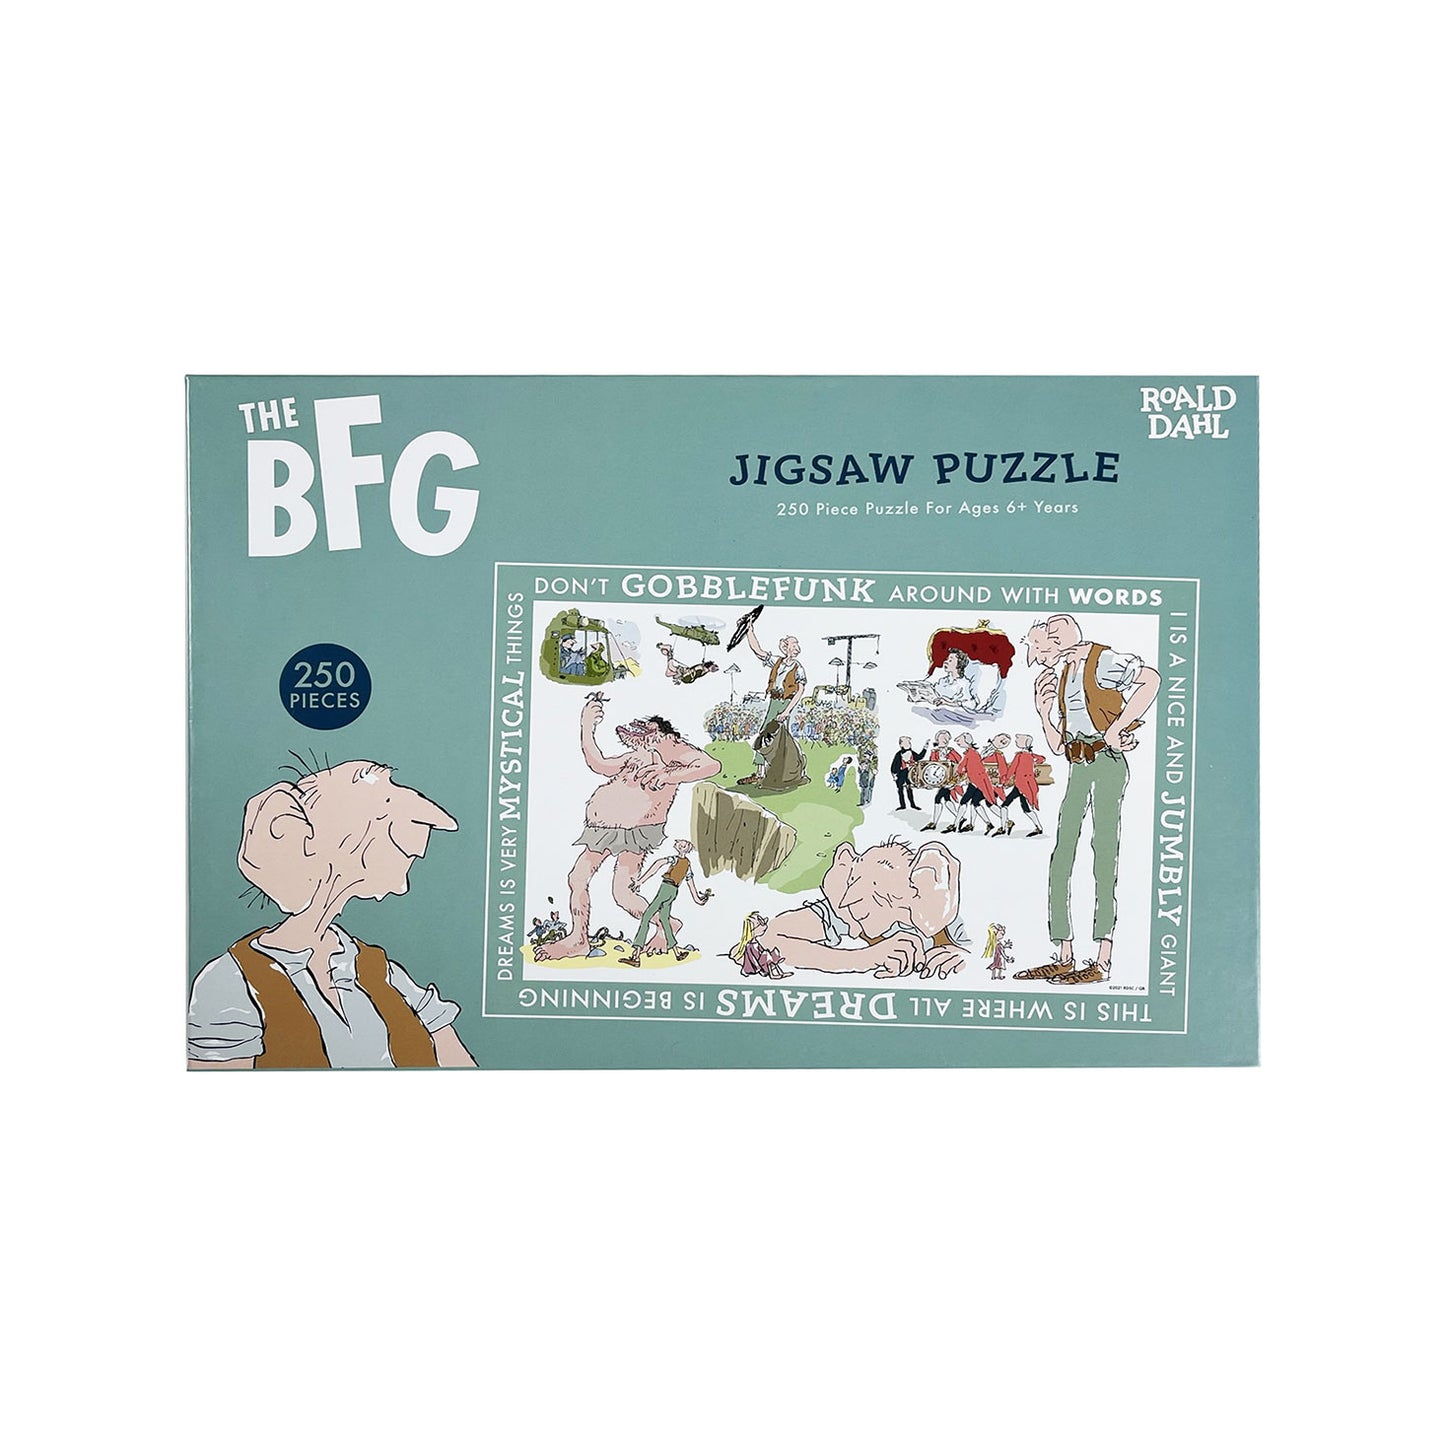 The BFG Jigsaw Puzzle based on Roald Dahl with illustrations by Quentin Blake